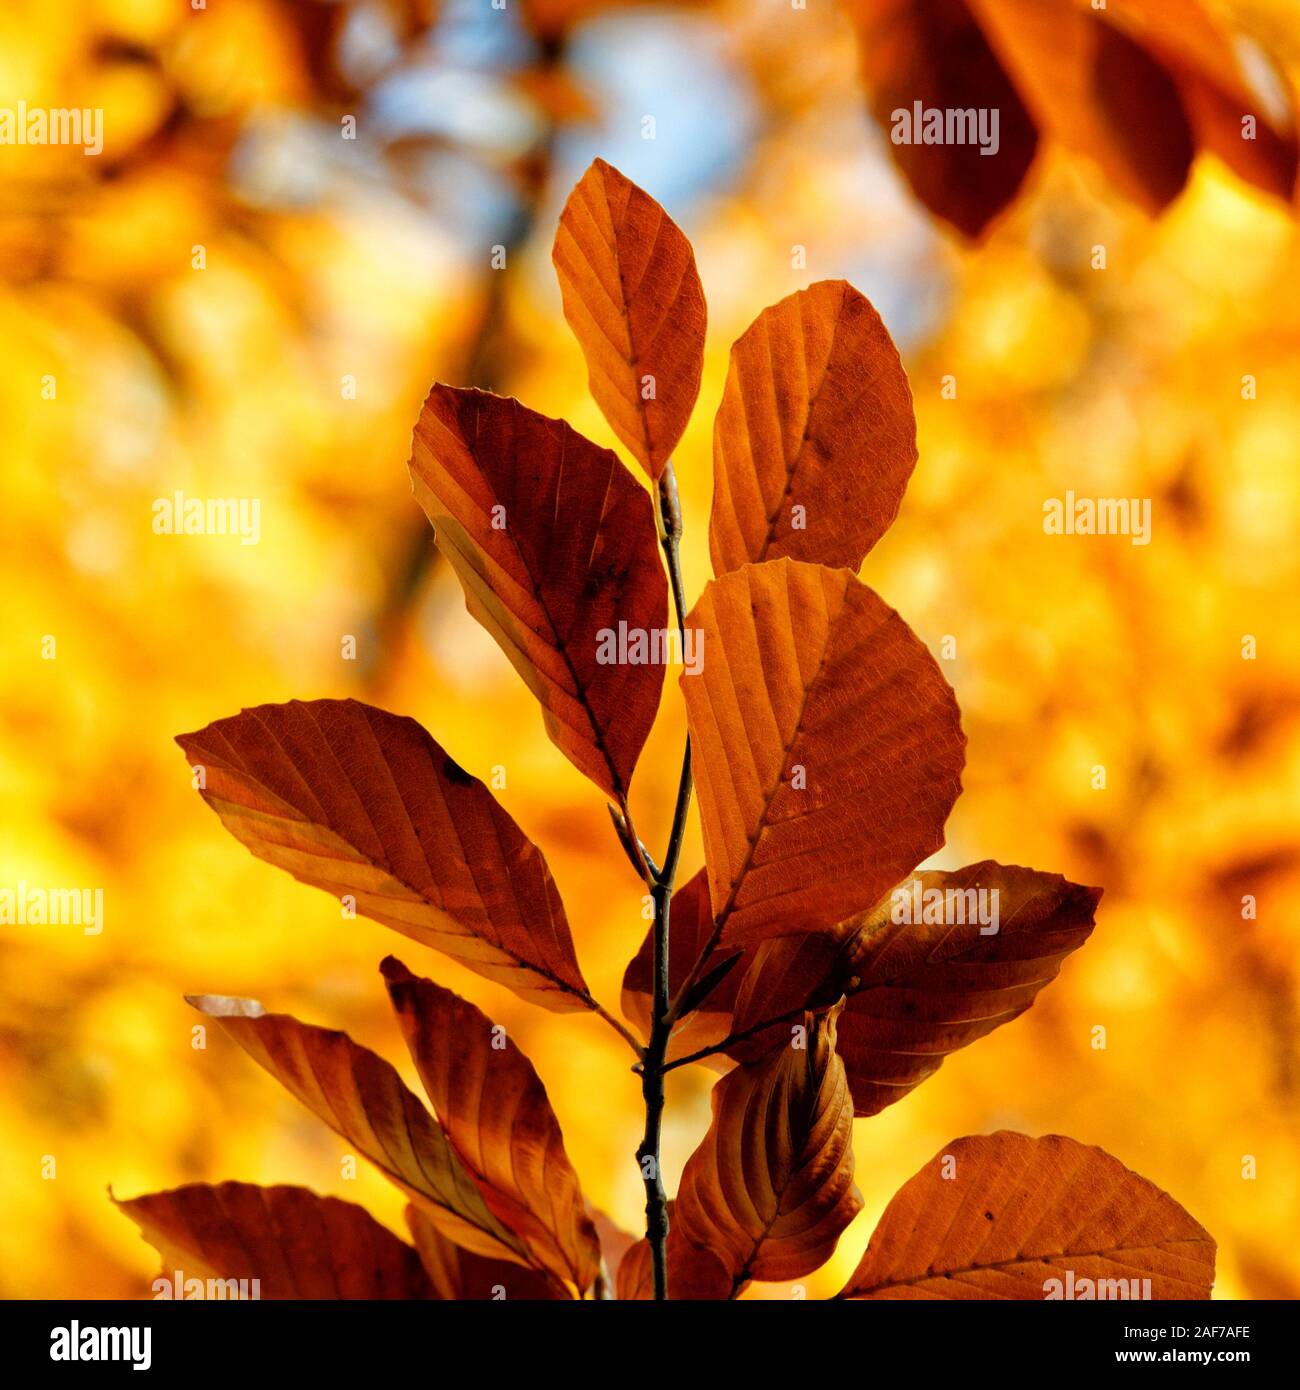 reddish brown autumn leaves of a beech tree in front of a blurred background Stock Photo